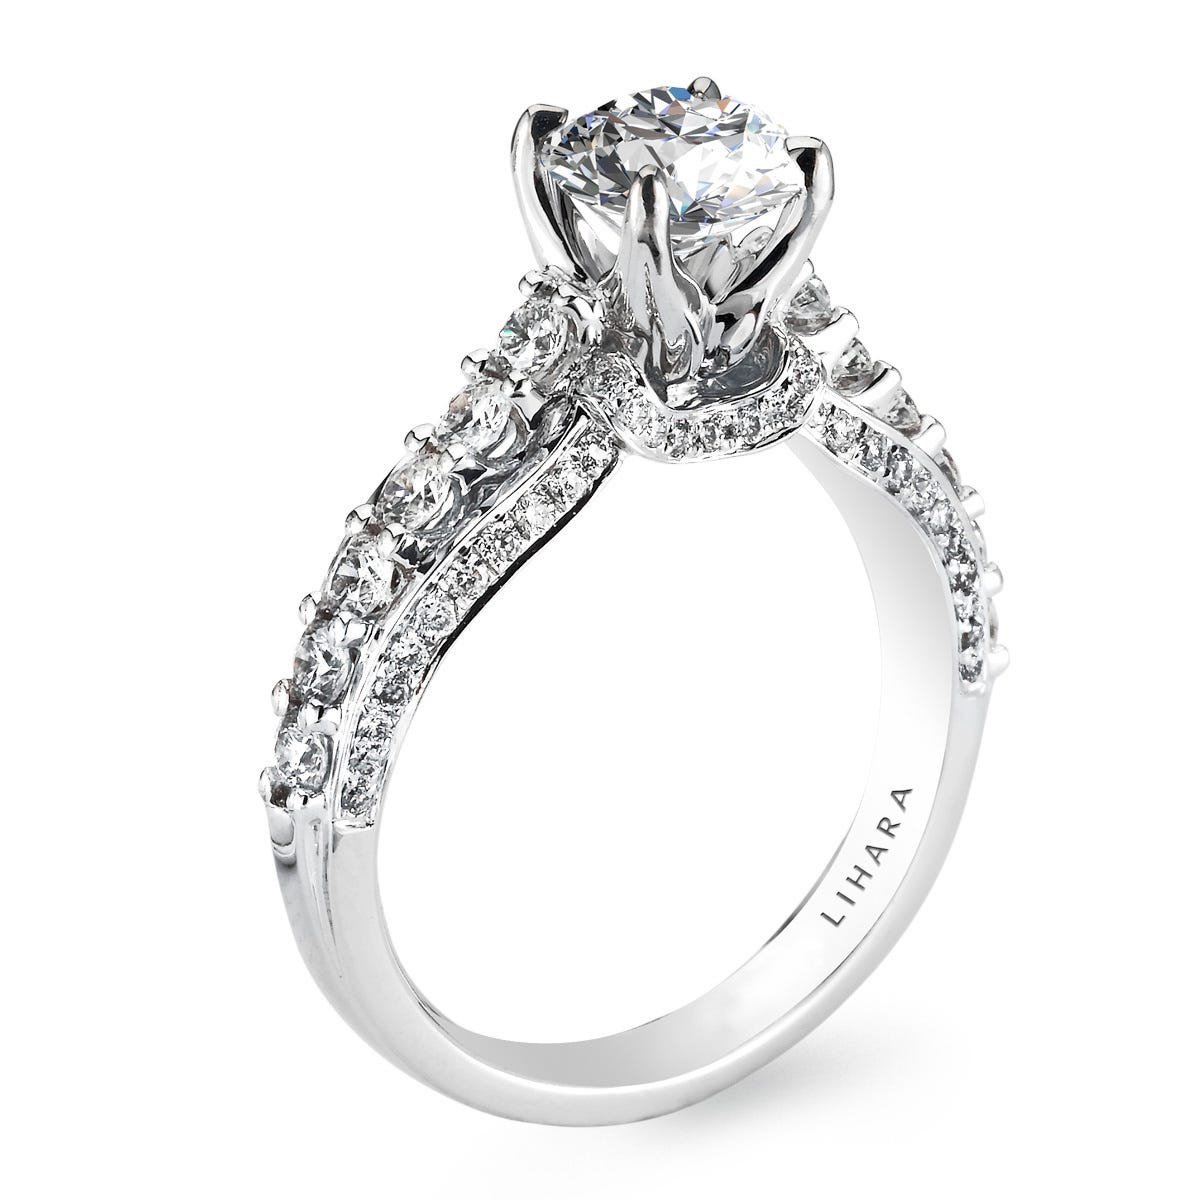 Best Deals On Wedding Rings
 Buy Engagement Rings line at Overstock